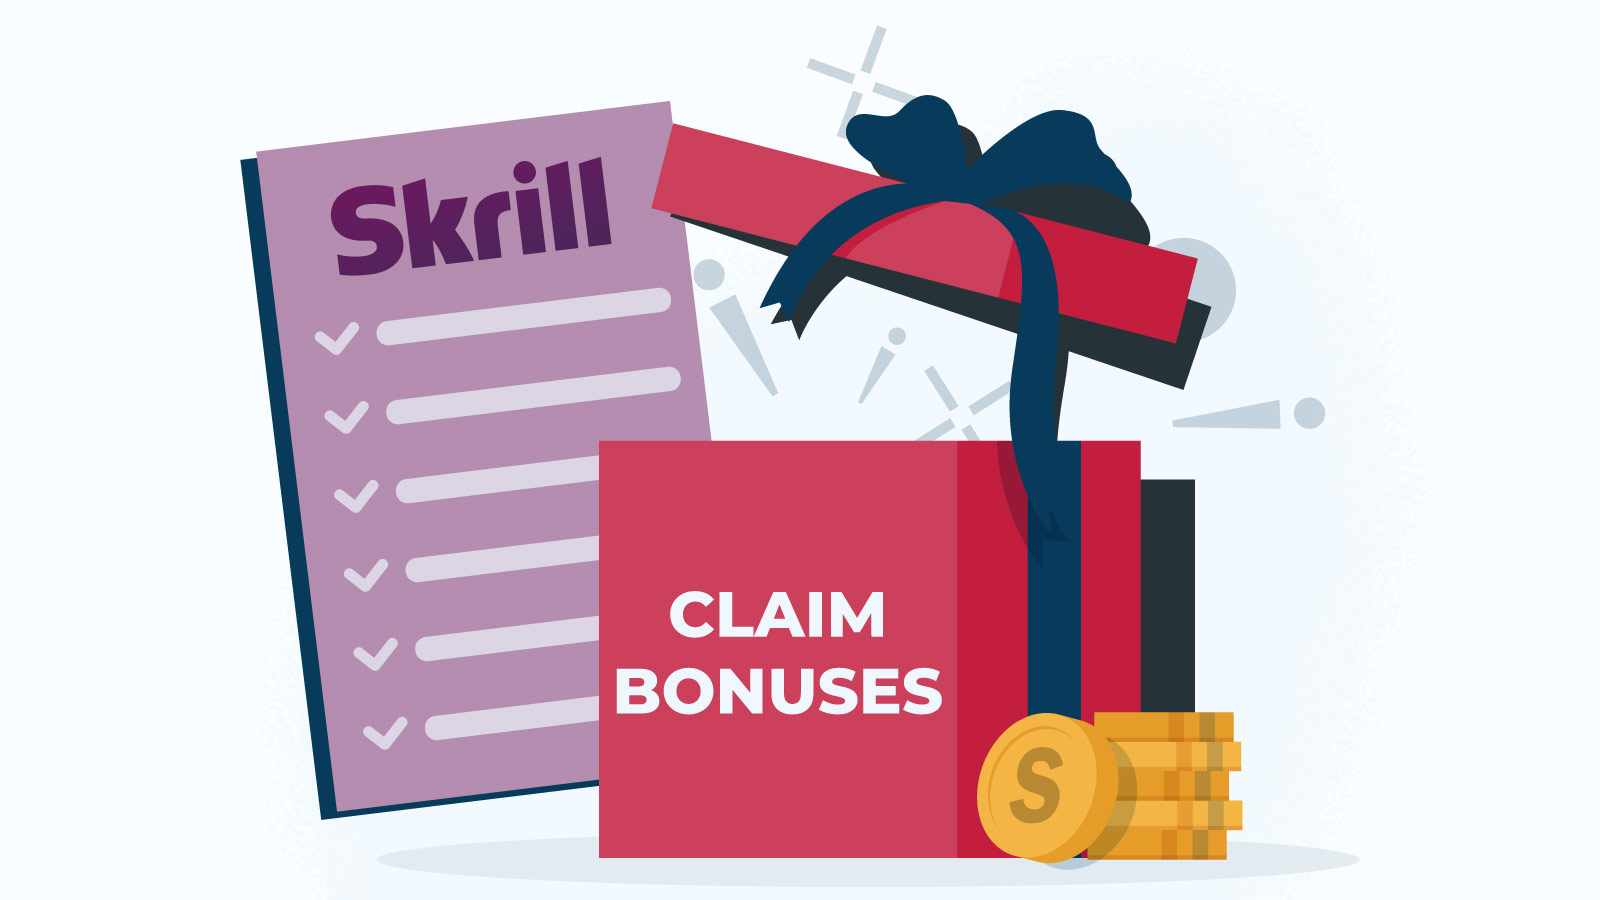 What to Know When Claiming Bonuses with Skrill